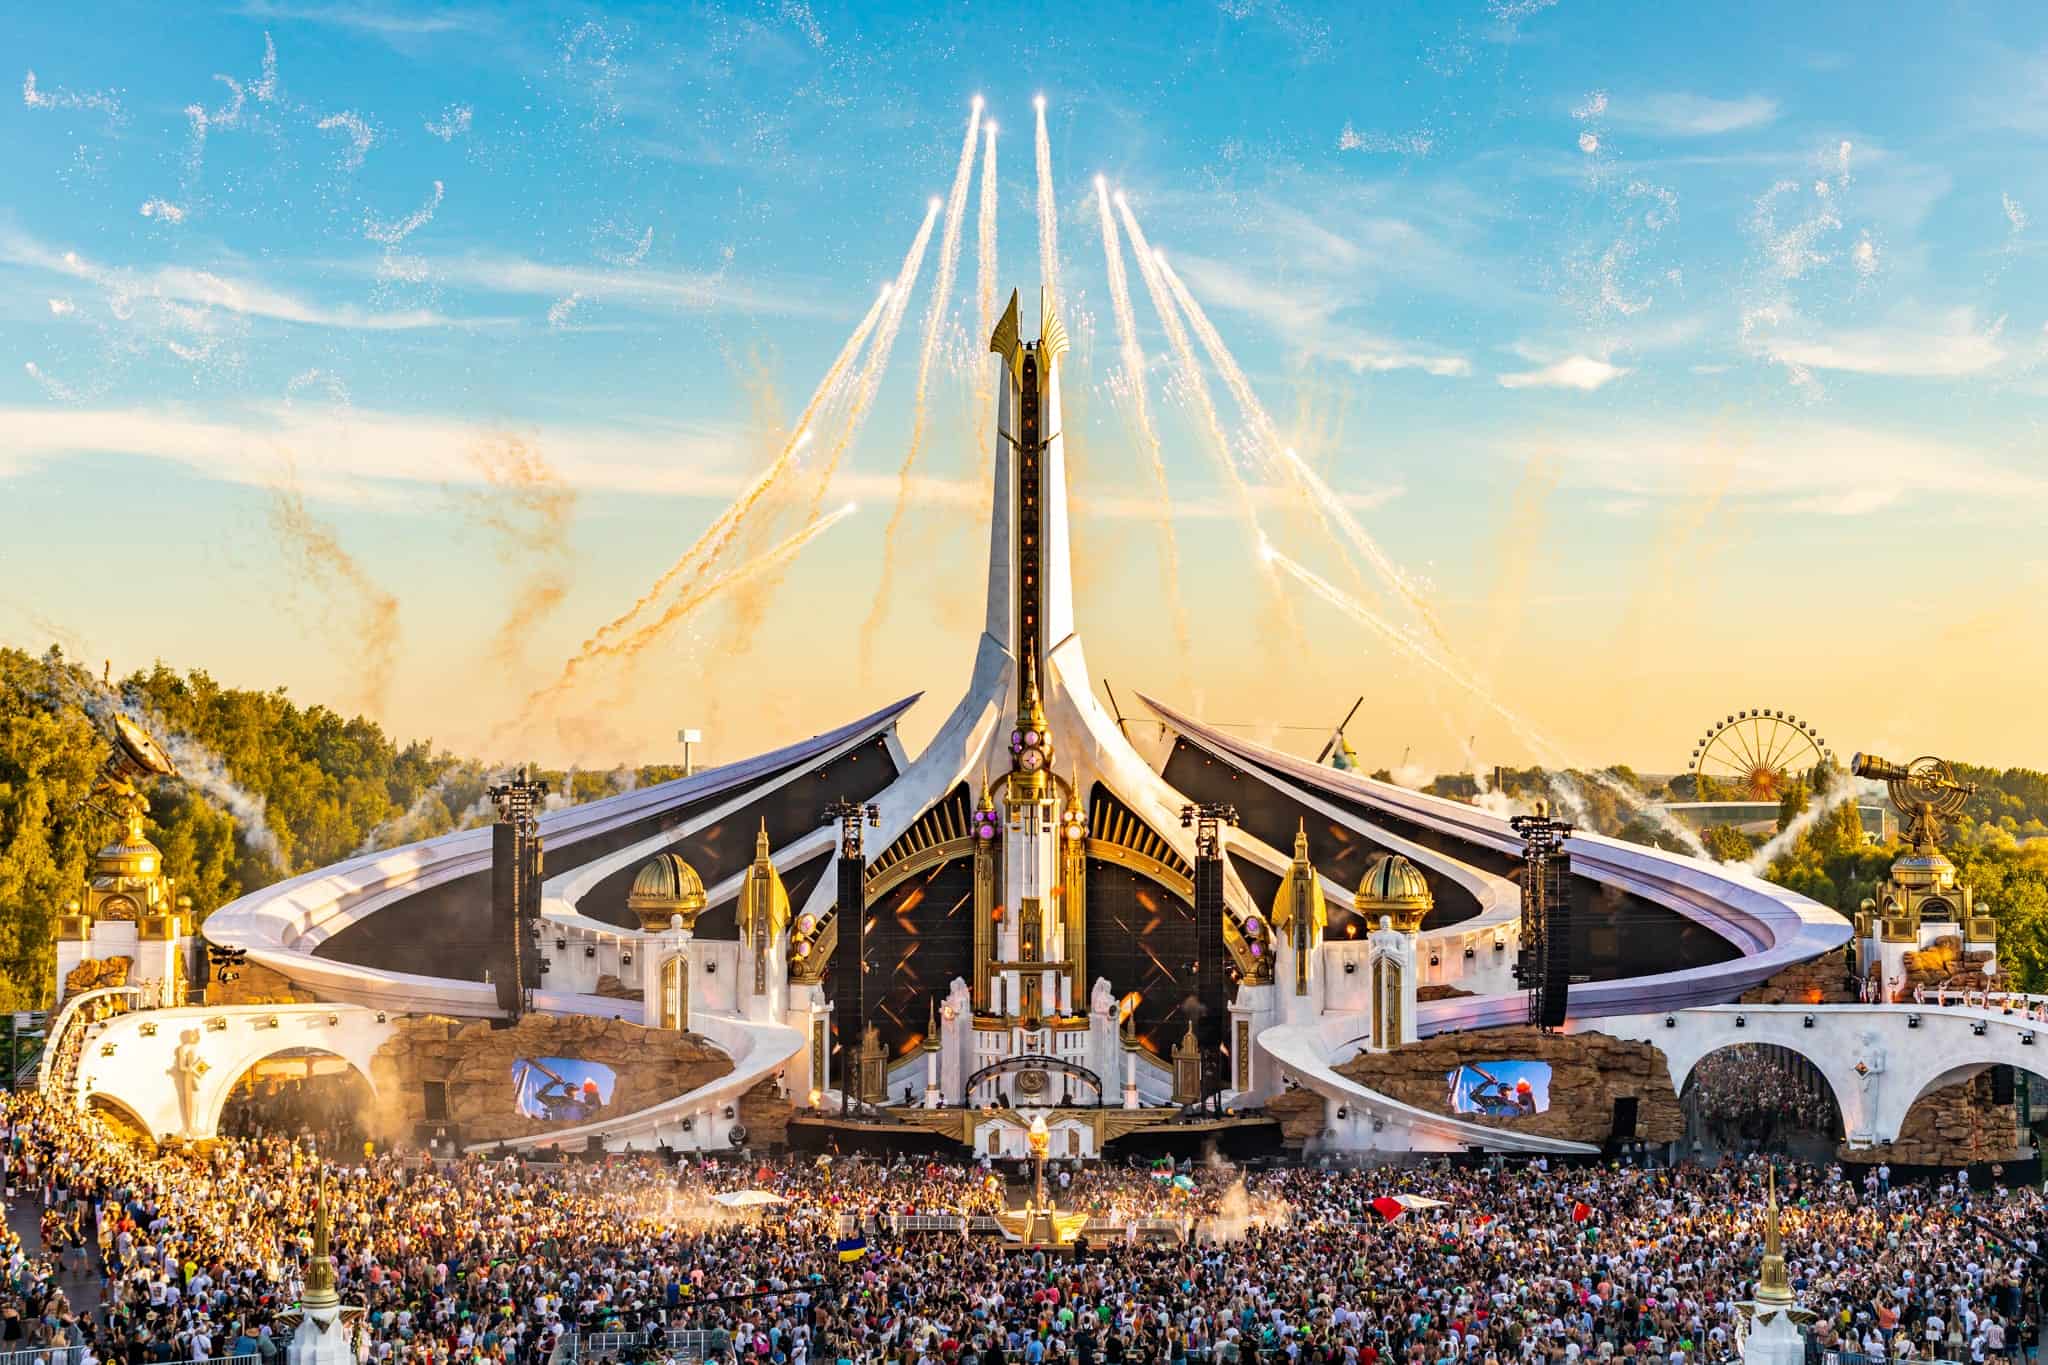 TOMORROWLAND 2023 GET READY FOR A MAGICAL RIDE THROUGH THE 17TH